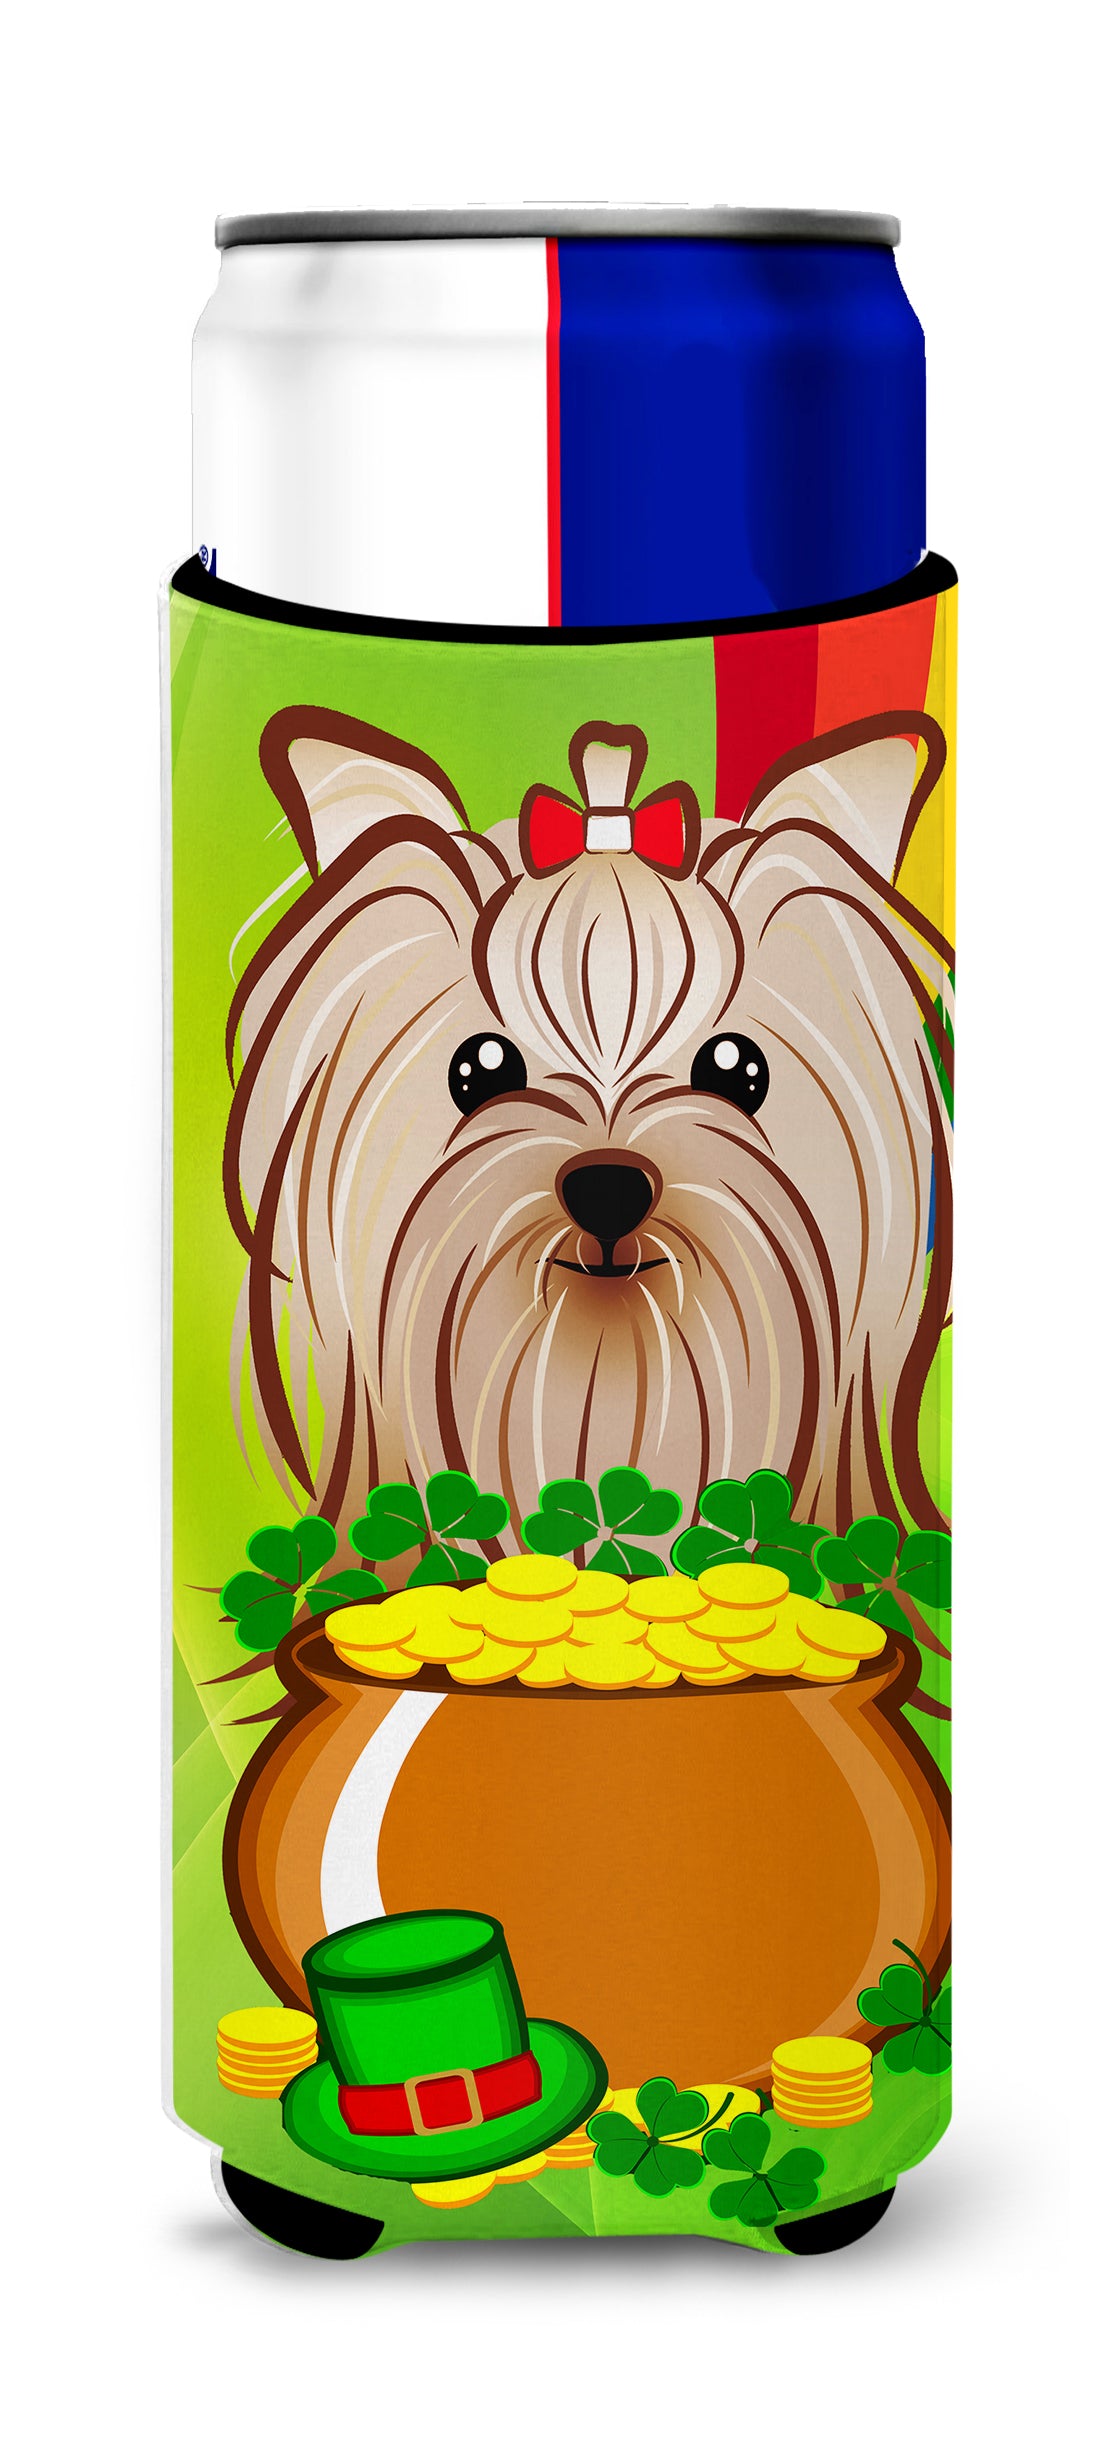 Yorkie Yorkshire Terrier St. Patrick's Day  Ultra Beverage Insulator for slim cans BB1948MUK